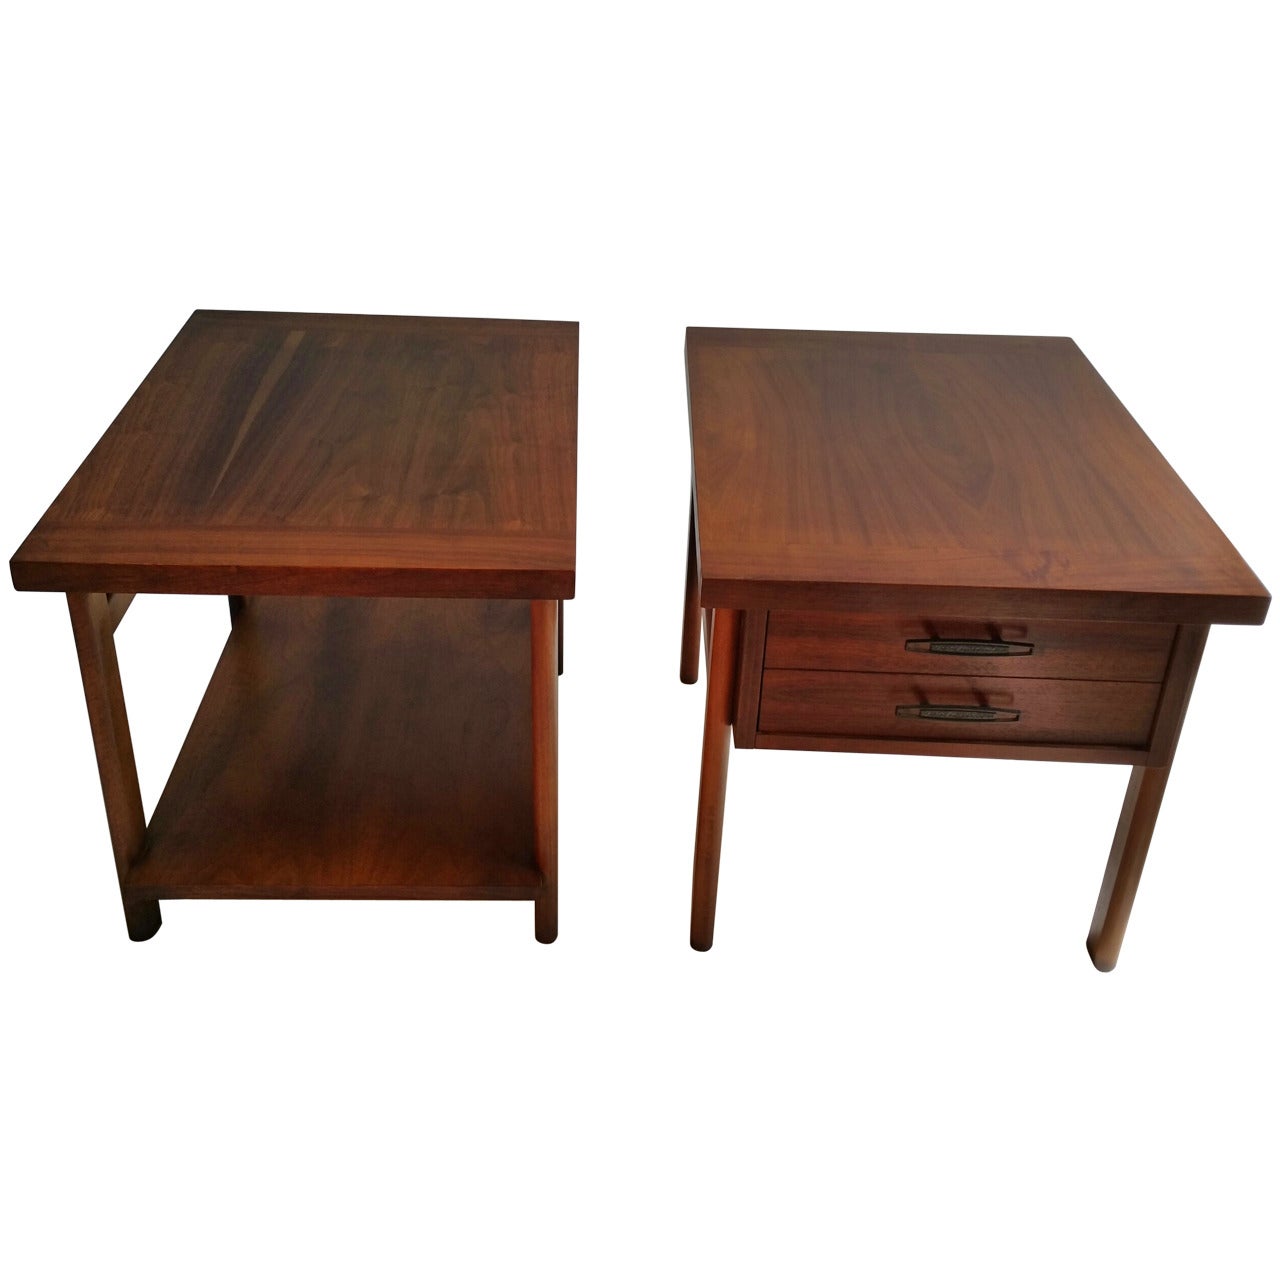 Mid-Century Modern Walnut Tables or Stands, Manufactured by Lane